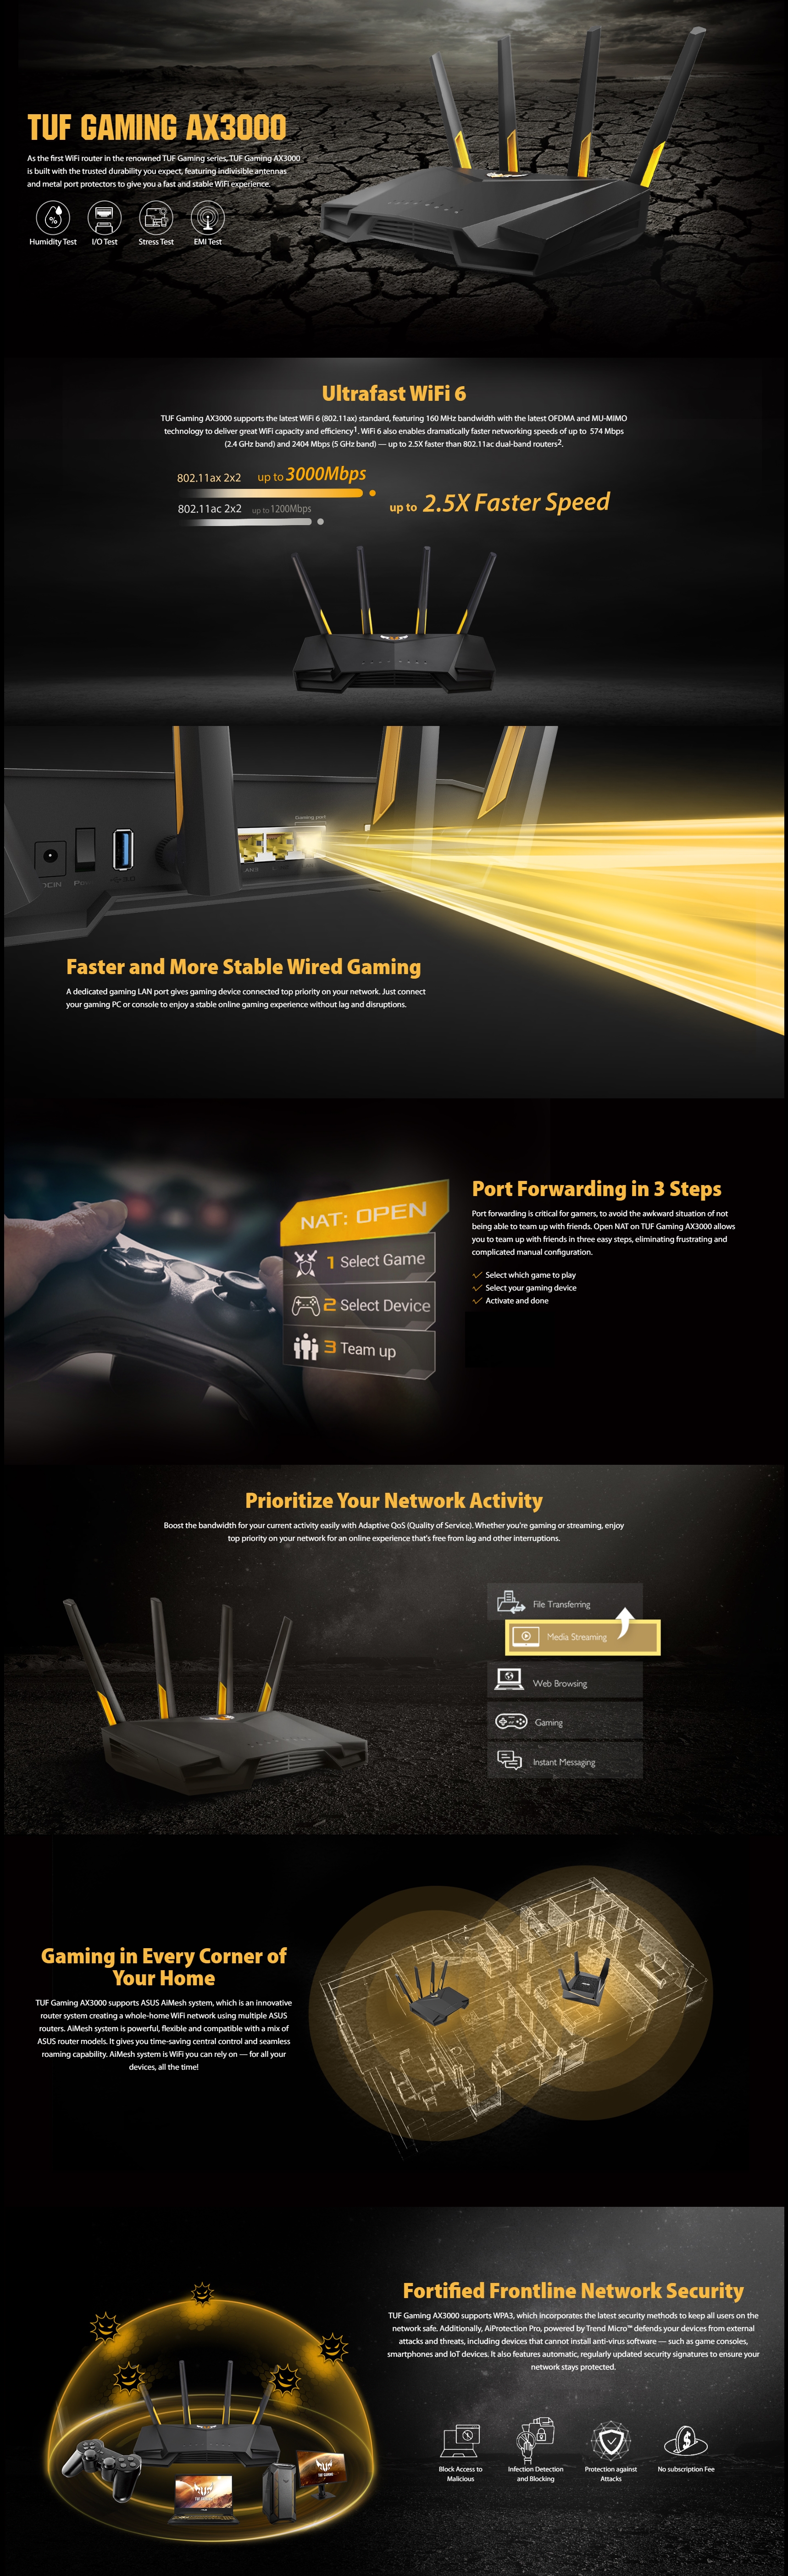 A large marketing image providing additional information about the product ASUS TUF Gaming AX3000 Wi-Fi 6 Dual Band Gigabit Router - Additional alt info not provided